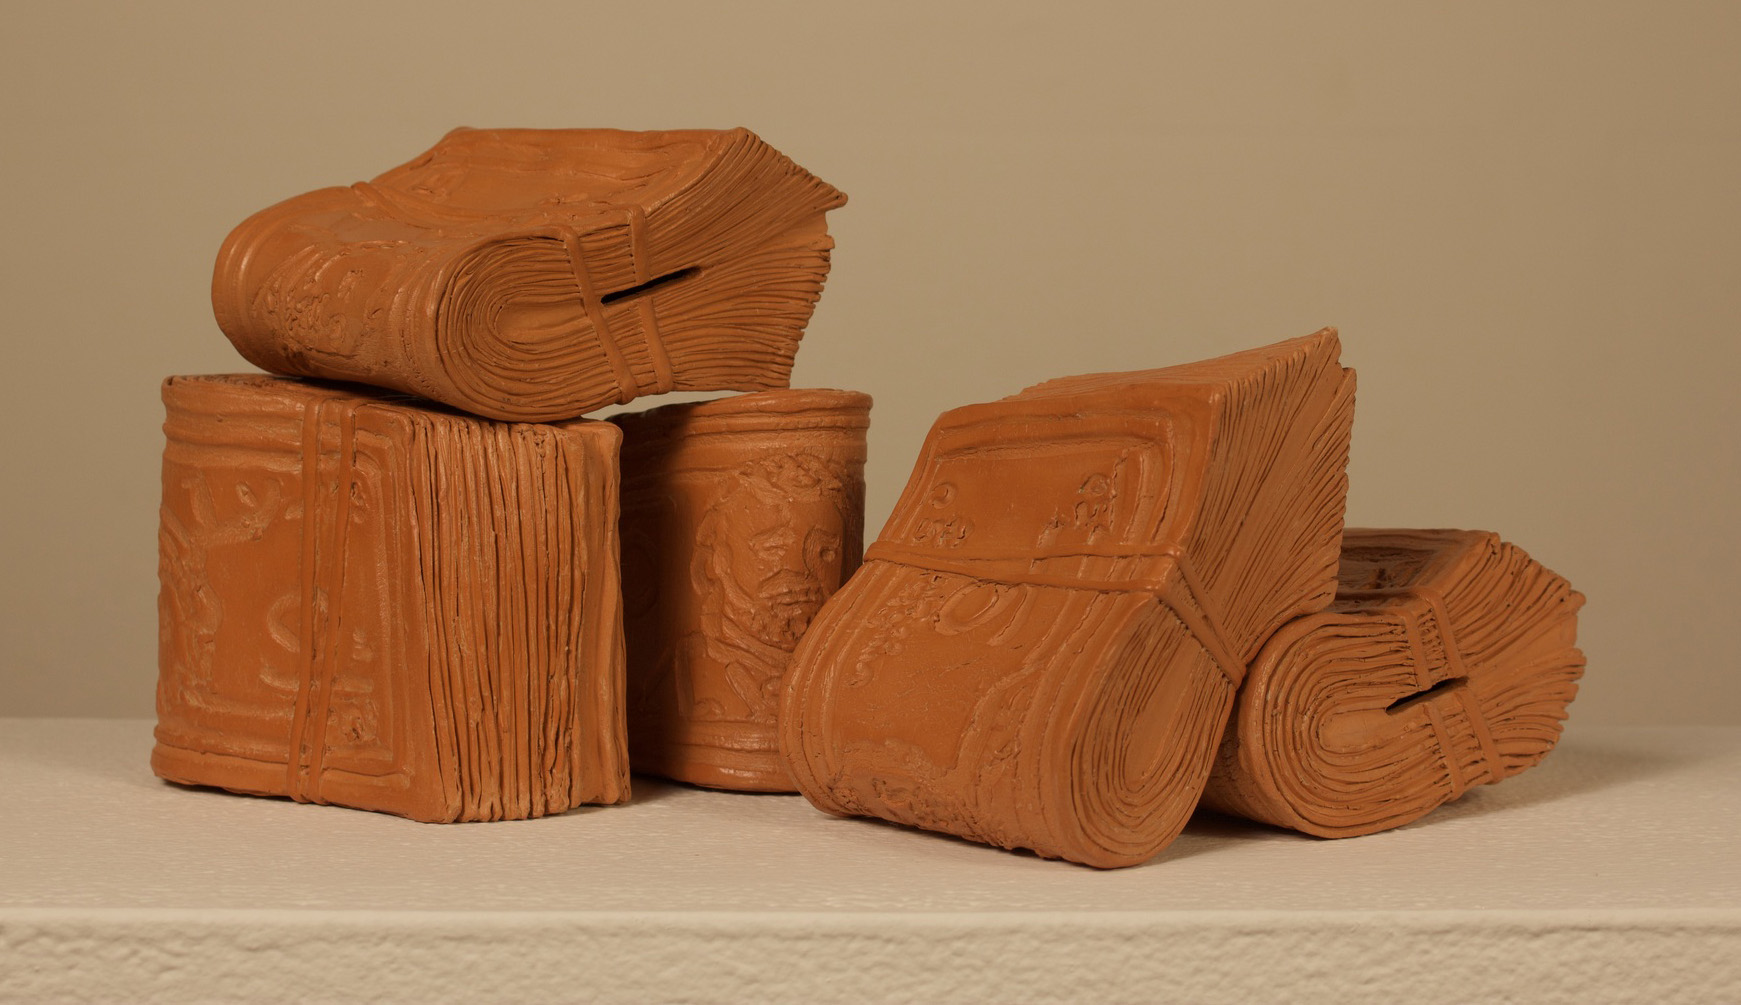 Luciano Pimienta terra cotta and wax titled Biyuyo de 50 depicts 5 folded stacks of currency 